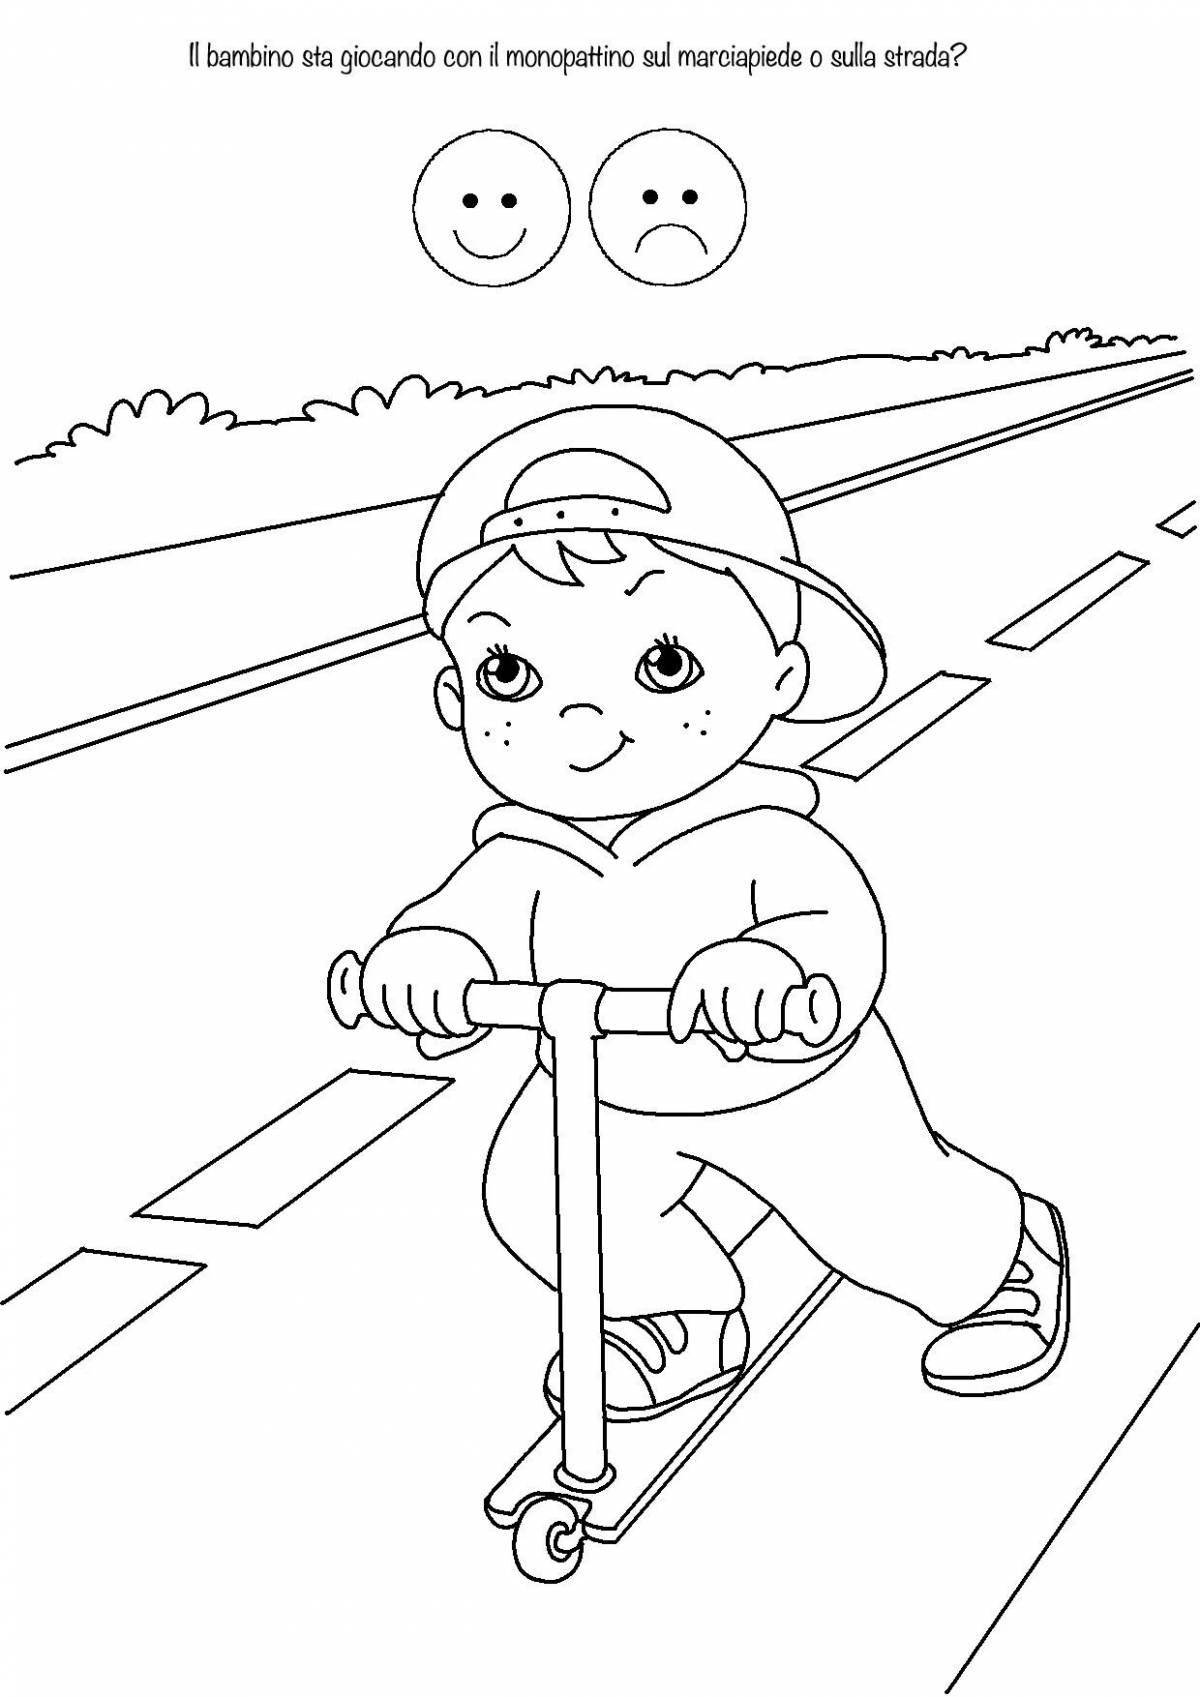 Attractive railroad safety coloring page